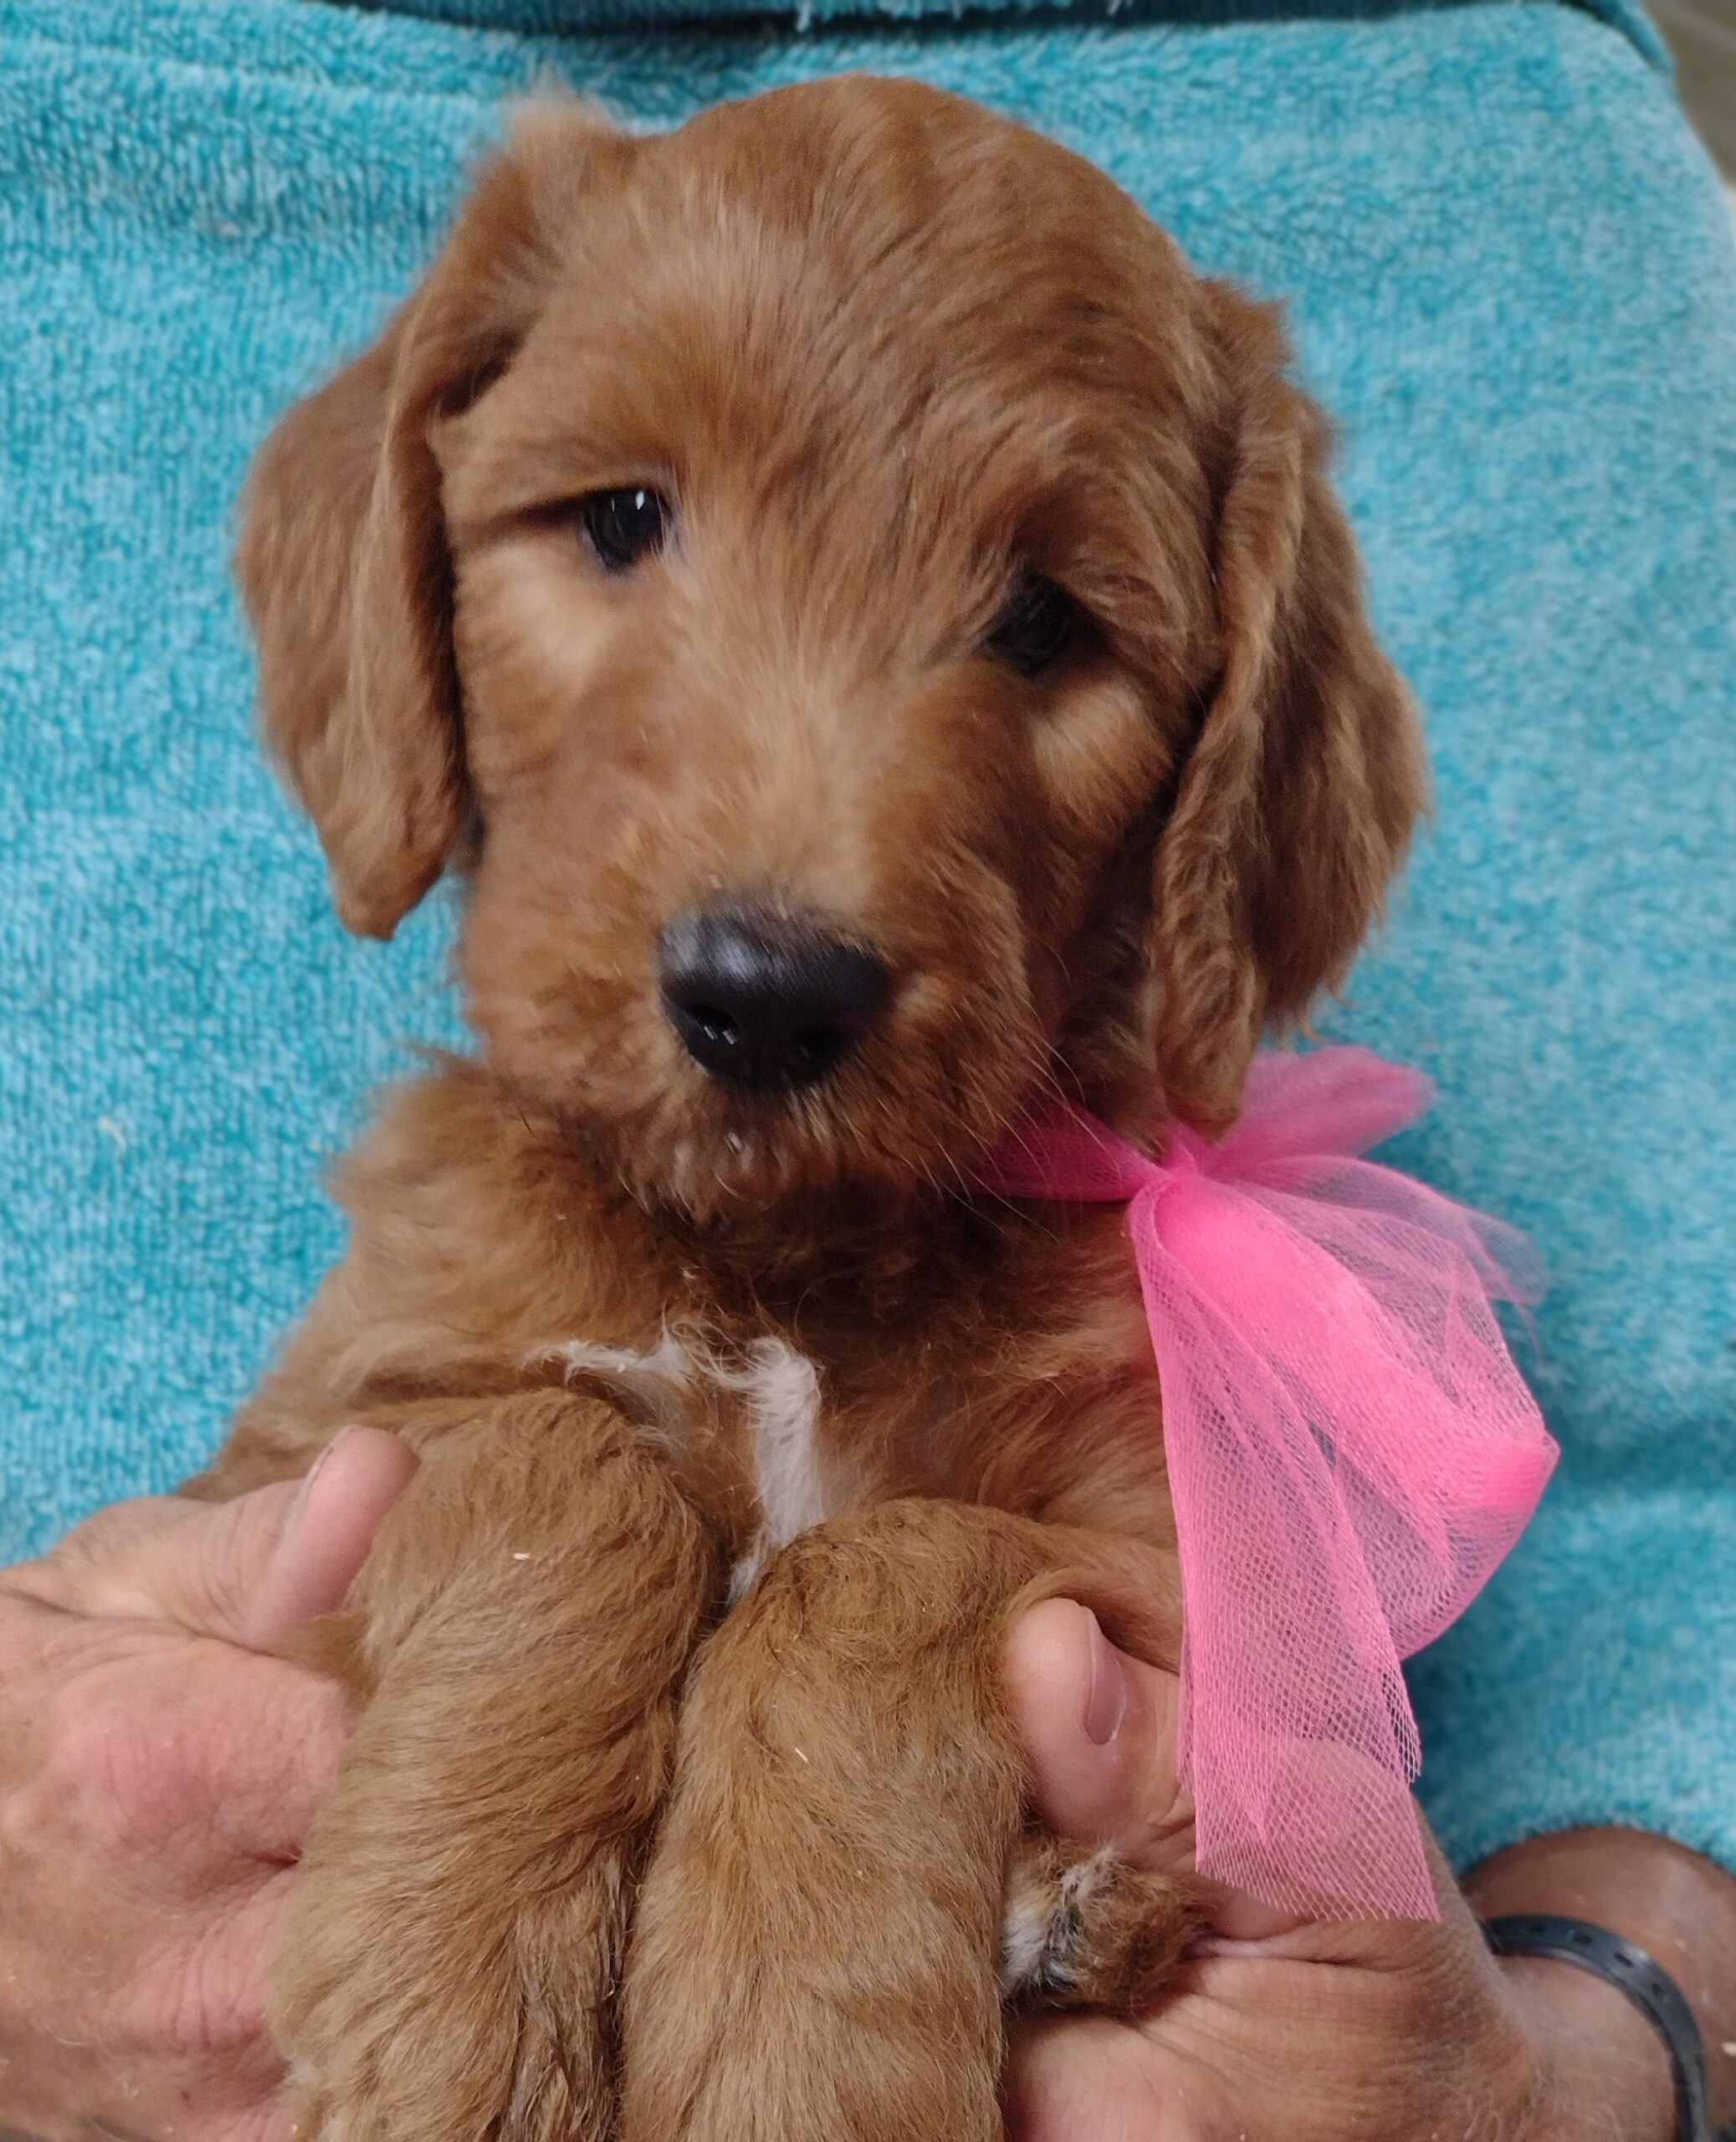 CONGRATULATIONS Dale And Laurel On Your New Female Goldendoodle Puppy From Red Cedar Farms Goldendoodles In Hutchinson, MN!